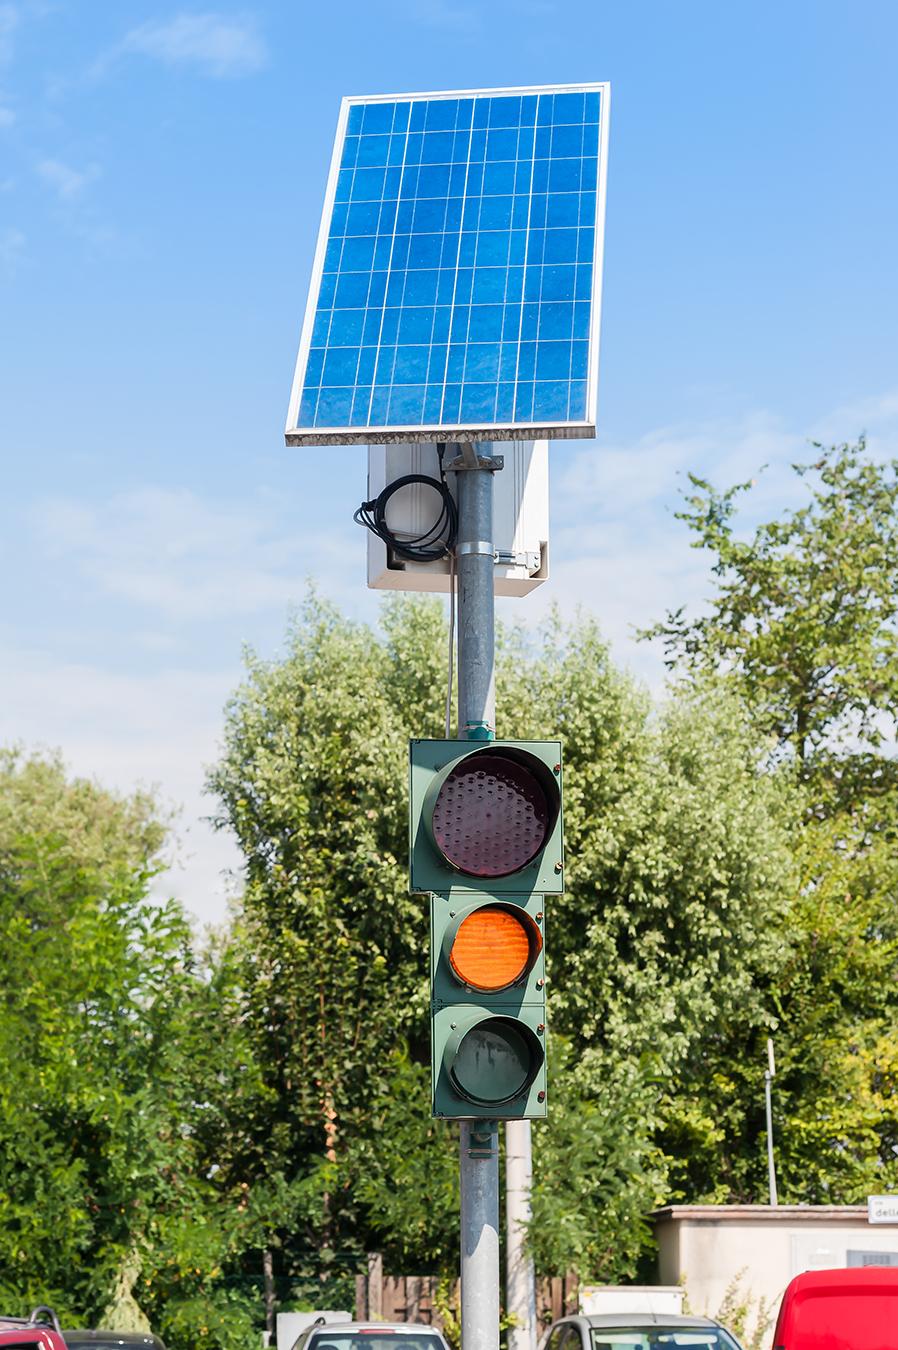 Exercise 1 Stand-Alone PV Systems for DC Loads Discussion Road signaling Similarly to lighting systems for public spaces, some road signaling devices, such as traffic lights, illuminated stop signs,